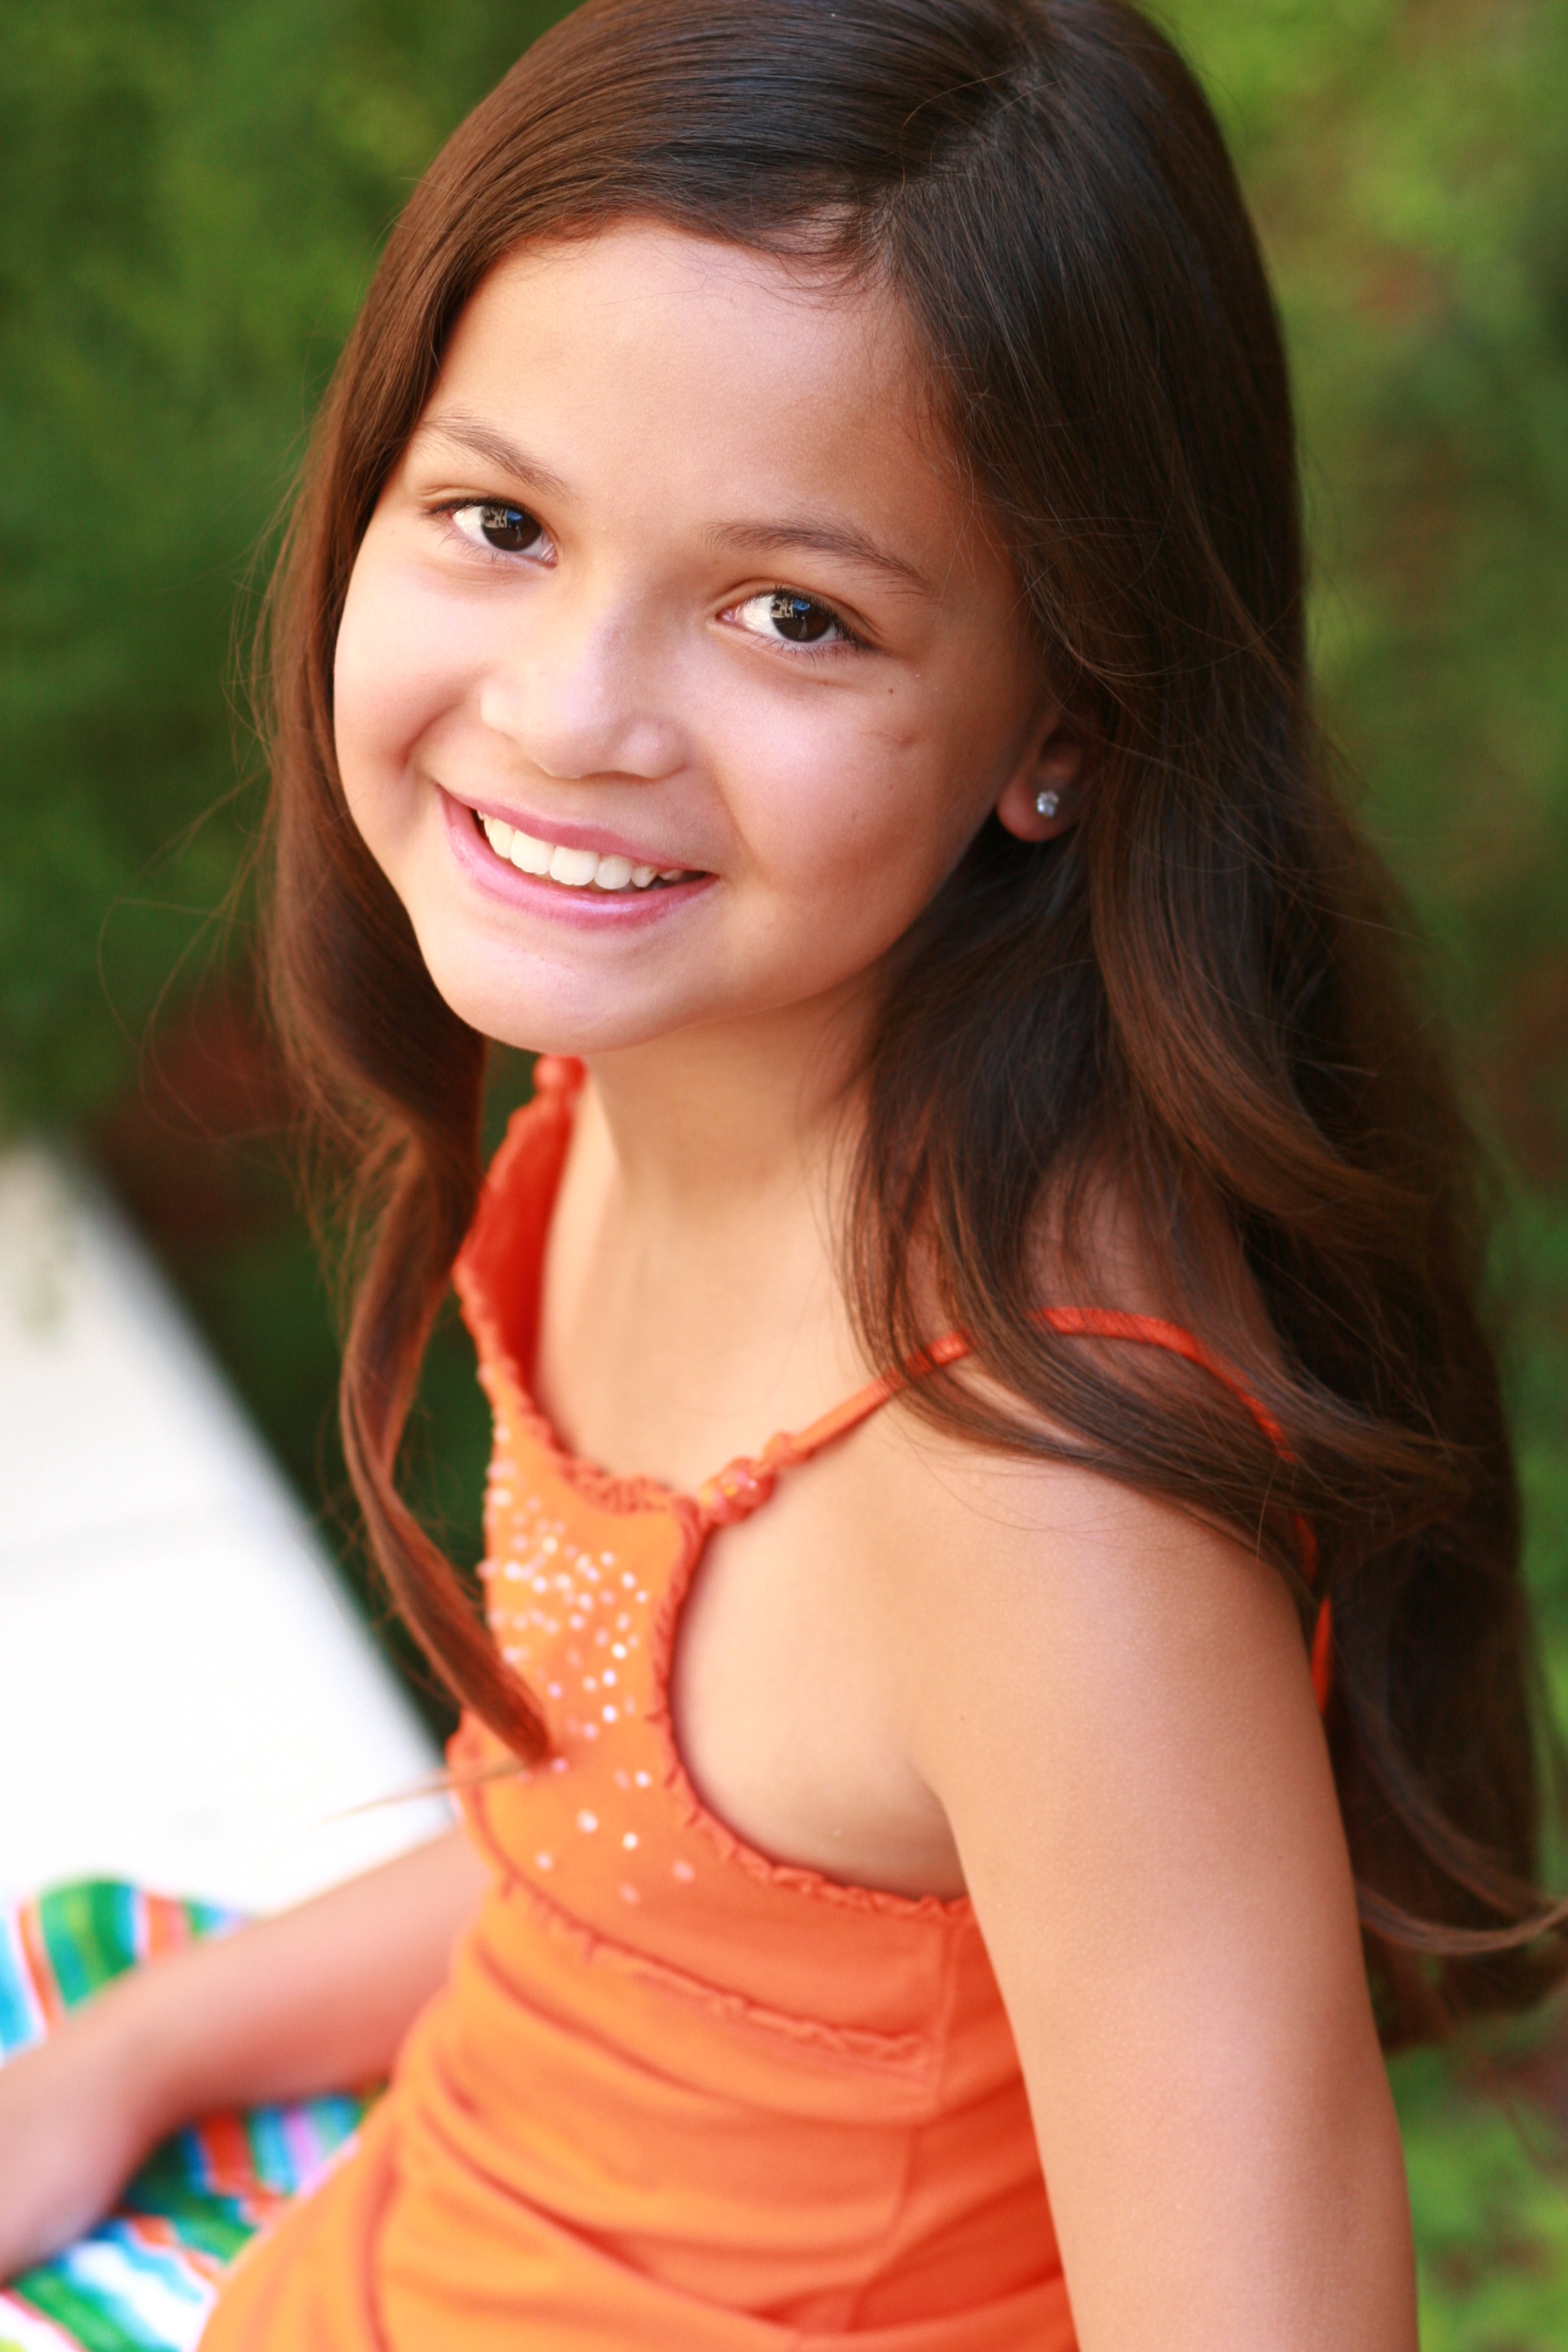 Carolyn's kids is recognized as one of the top model and talent agenci...